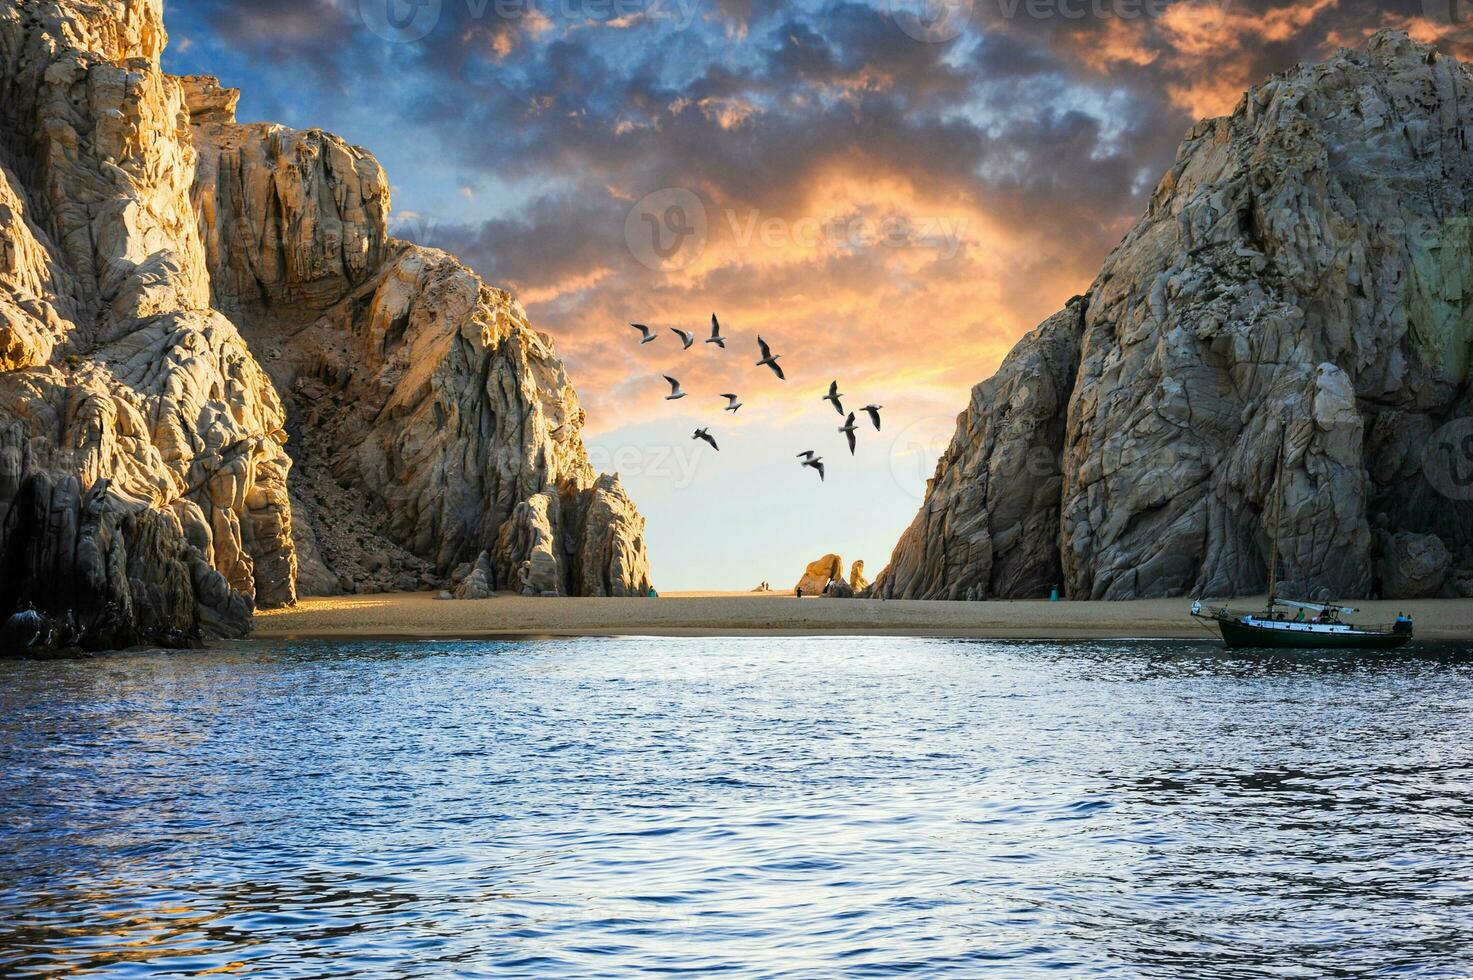 A little beach known as Lover's Beach of Cabo San Lucas is located on the Baja California Peninsula of Mexico, not far from the city of Cabo San Lucas. photo